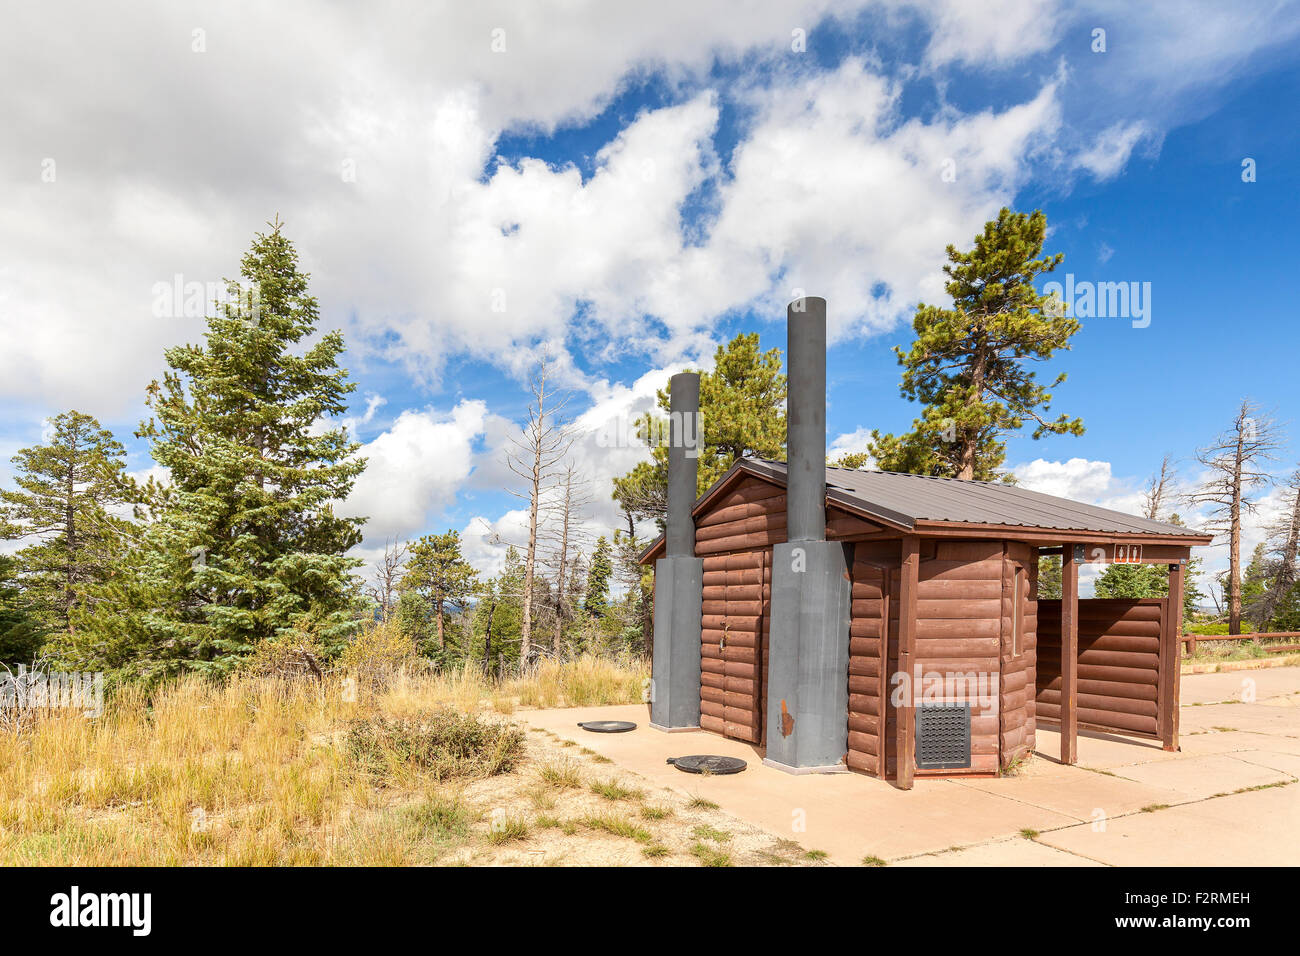 Wooden public toilet in Bryce Canyon National Park, Utah, USA. Stock Photo